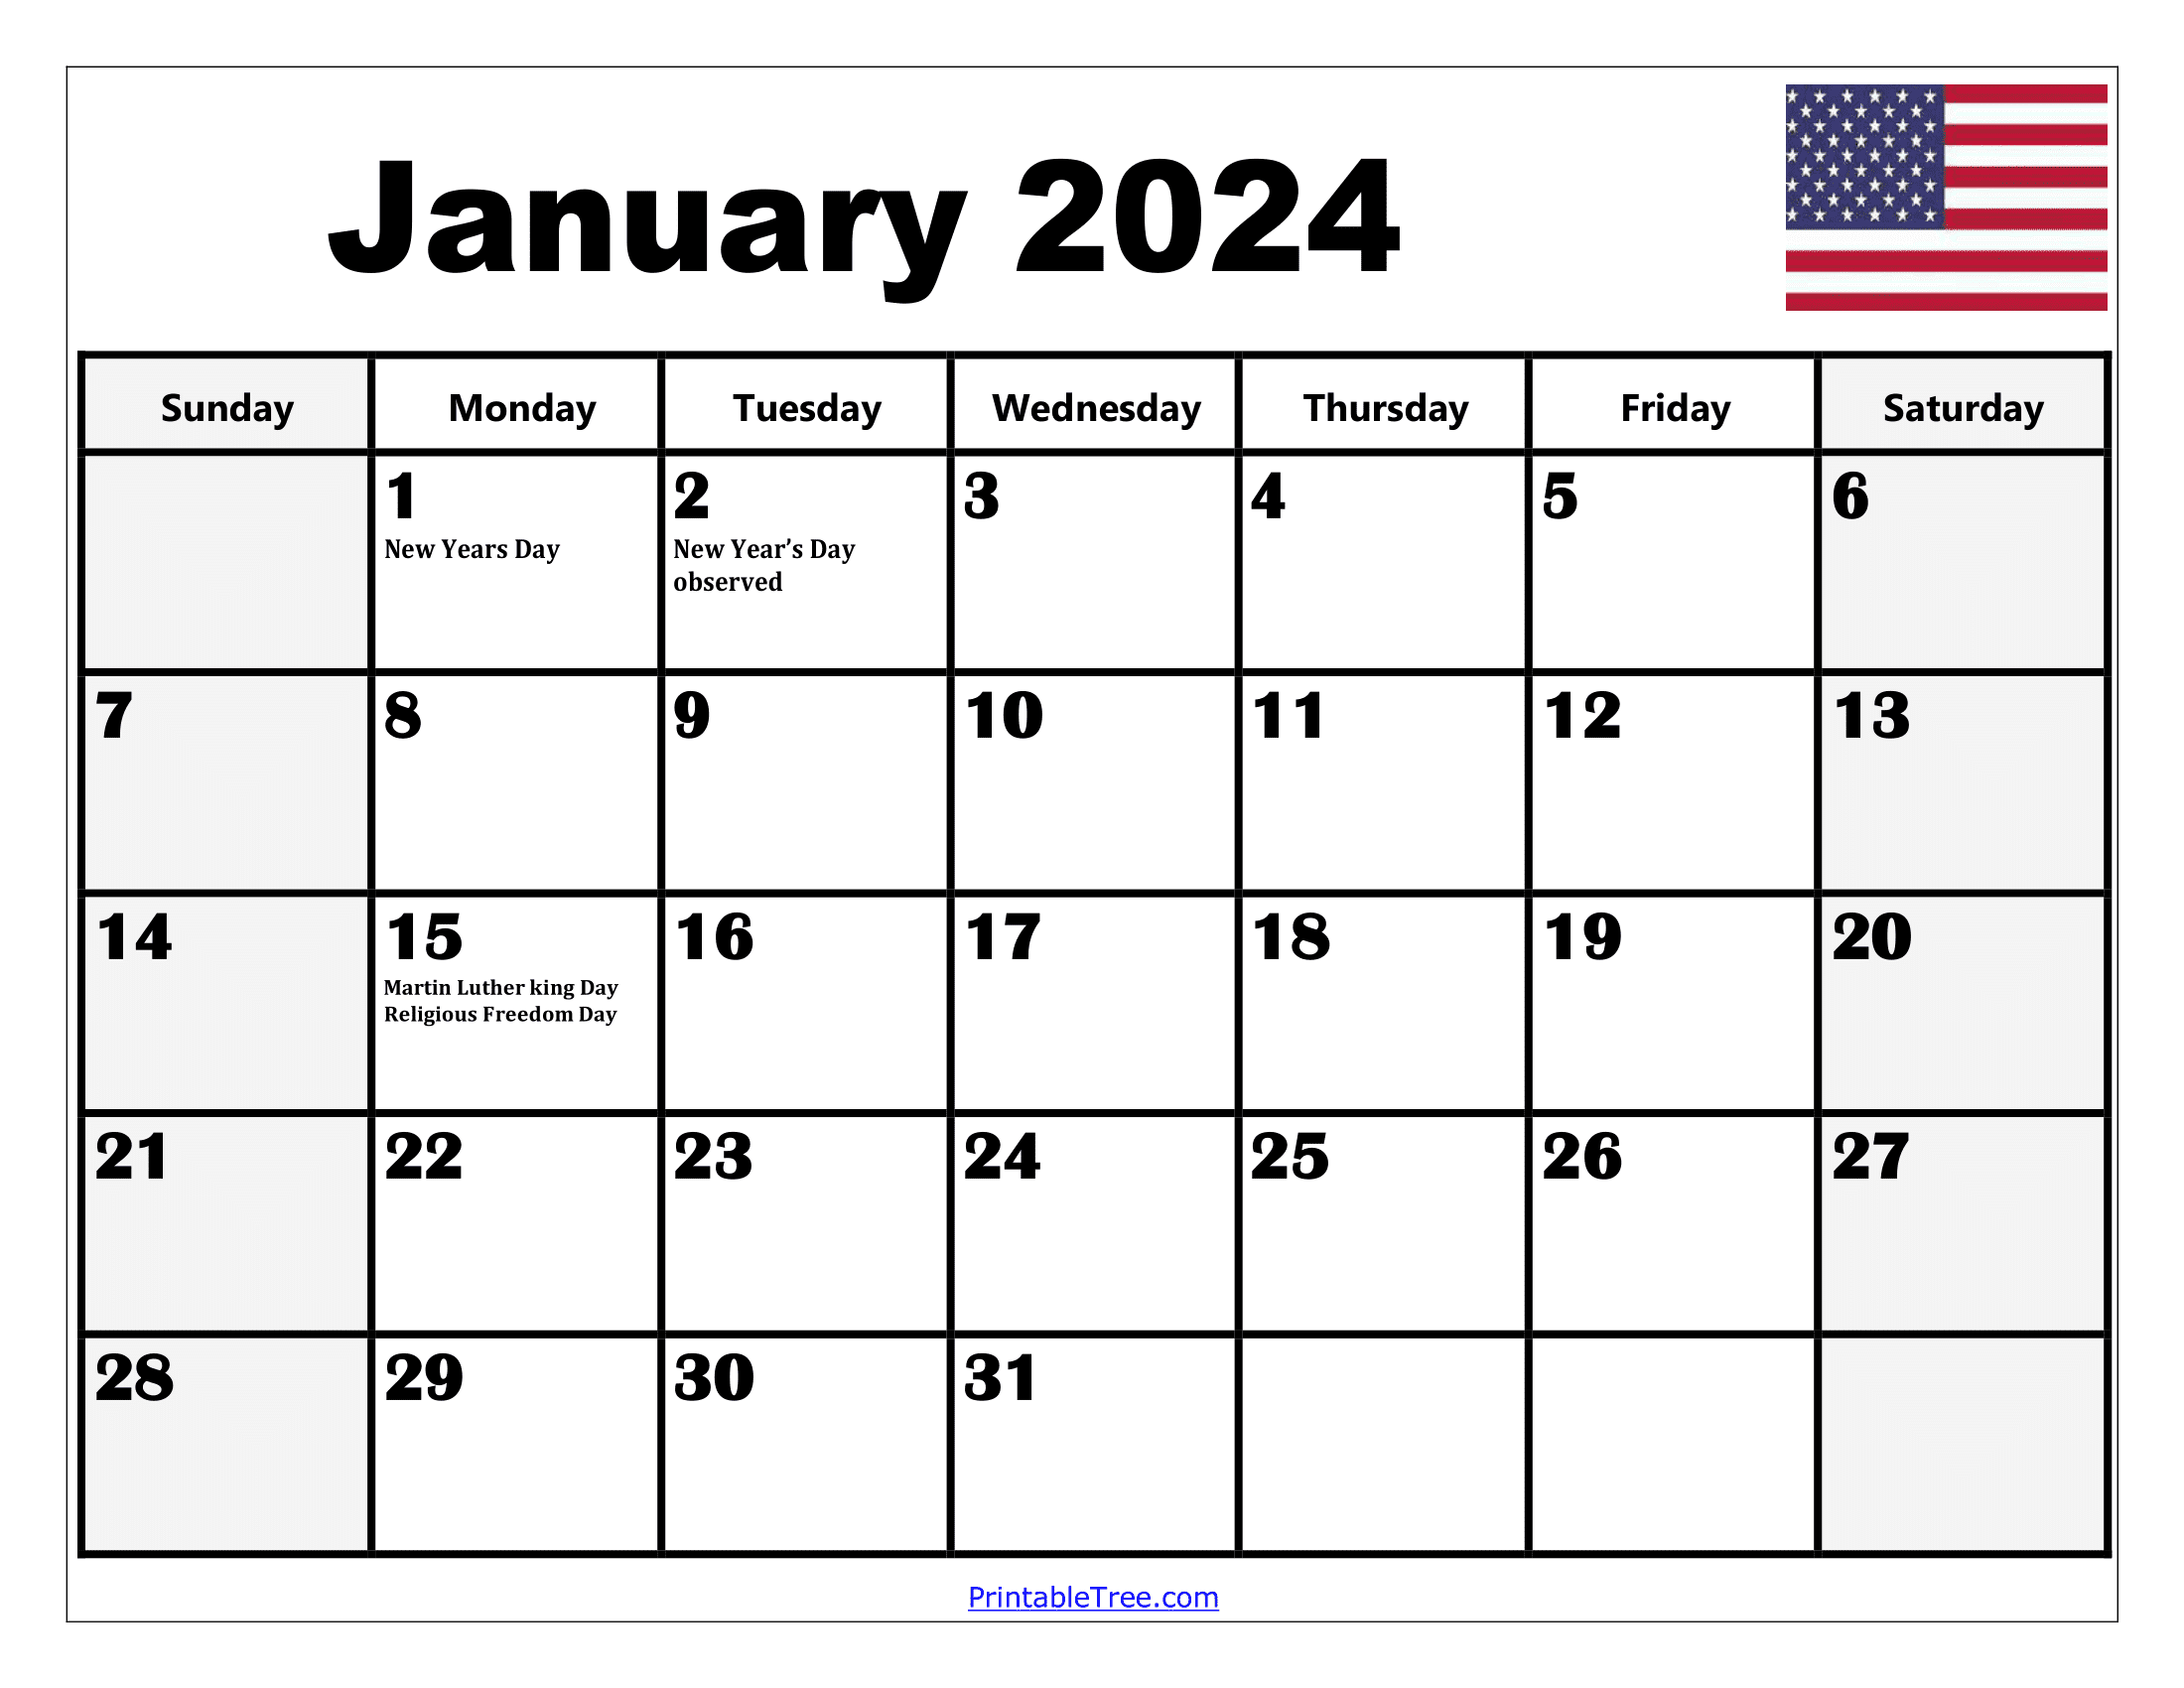 2024 Holiday Calendar Days Free Download Nov 2024 Calendar - Free Printable 2024 Calendar 2months In Page With Holidays